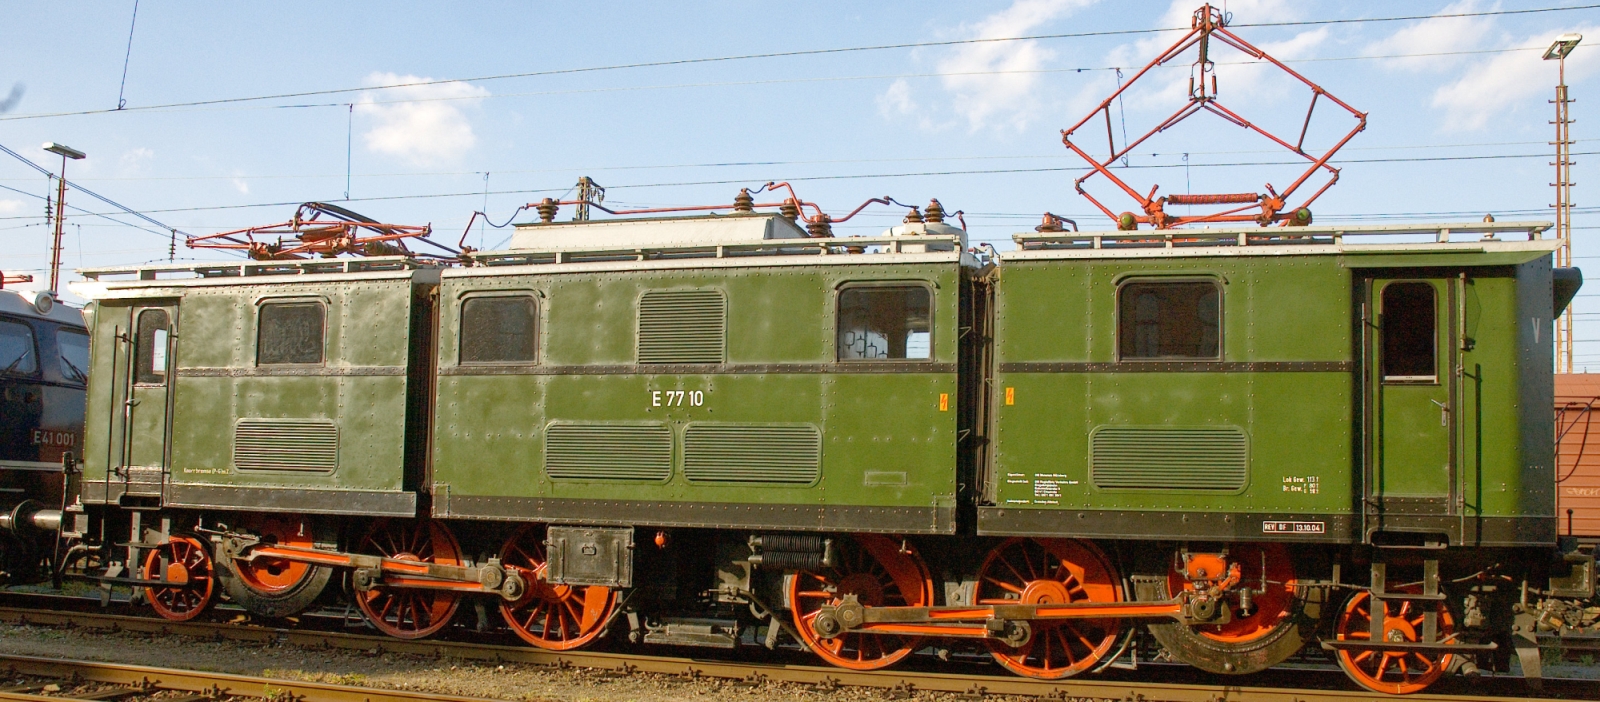 E 77 10 in September 2007 at the Fürth locomotive meeting